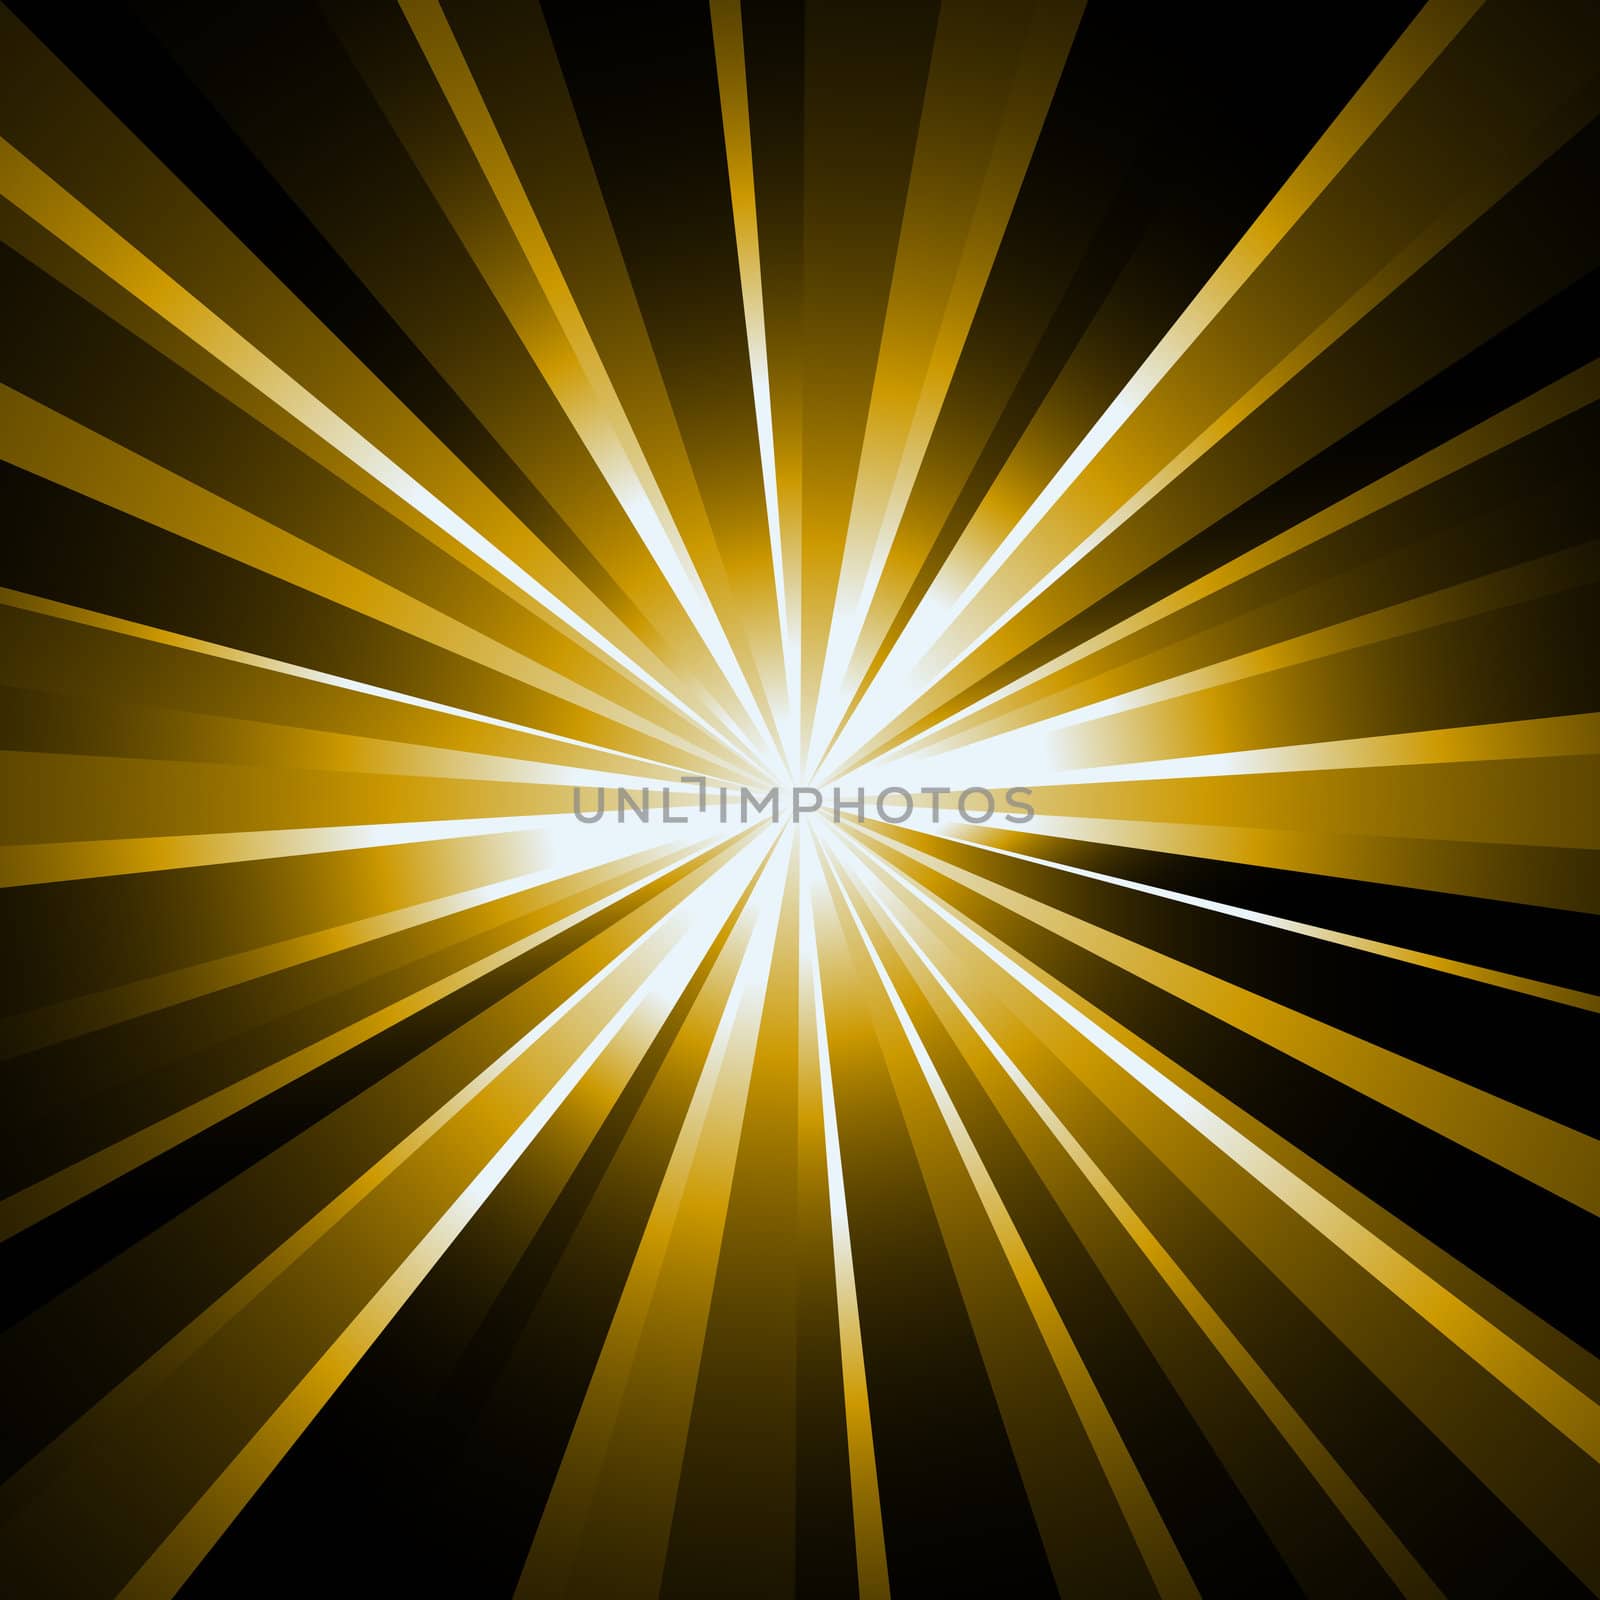 Laser beams background by peromarketing